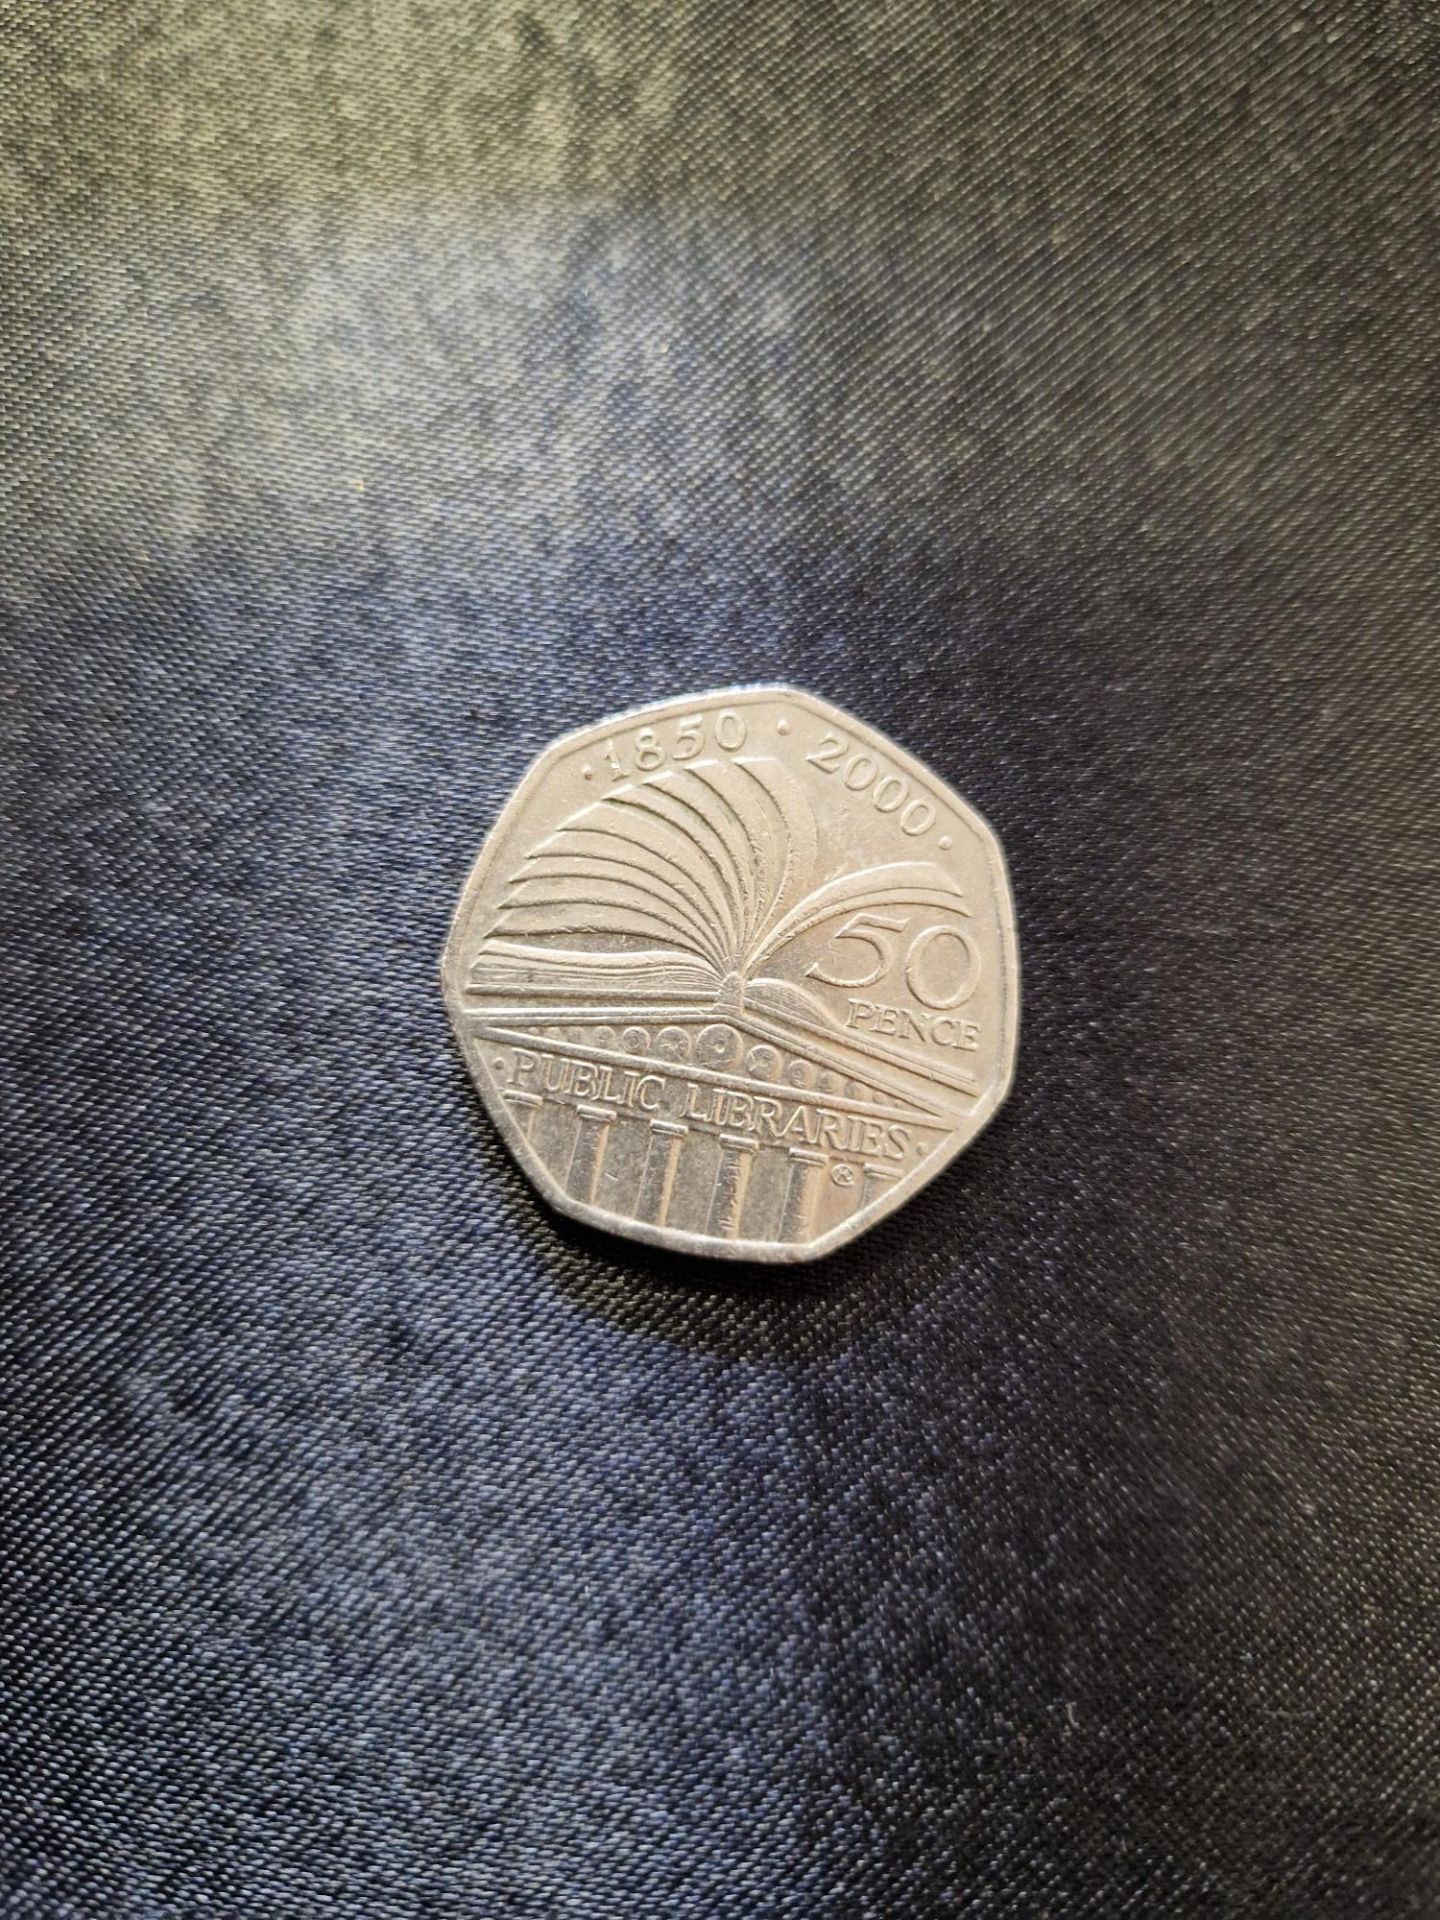 Collectors 50p coin